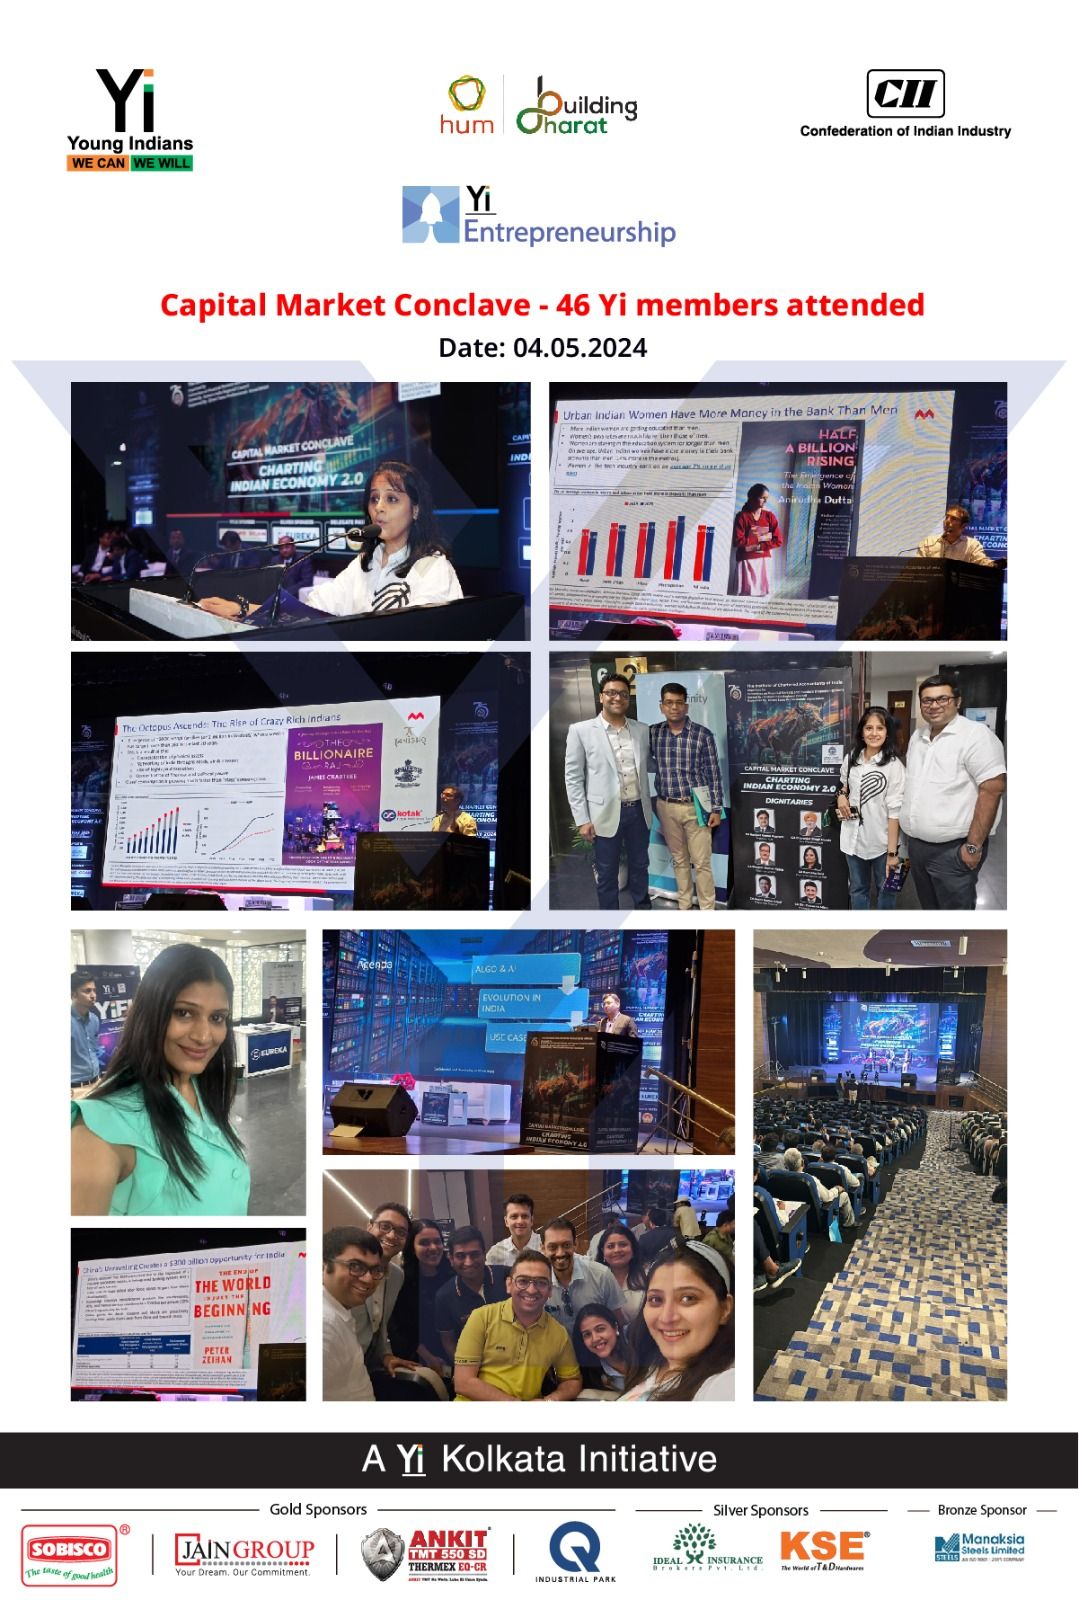 Yi24 | Capital Market Conclave - 46 Yi members attended